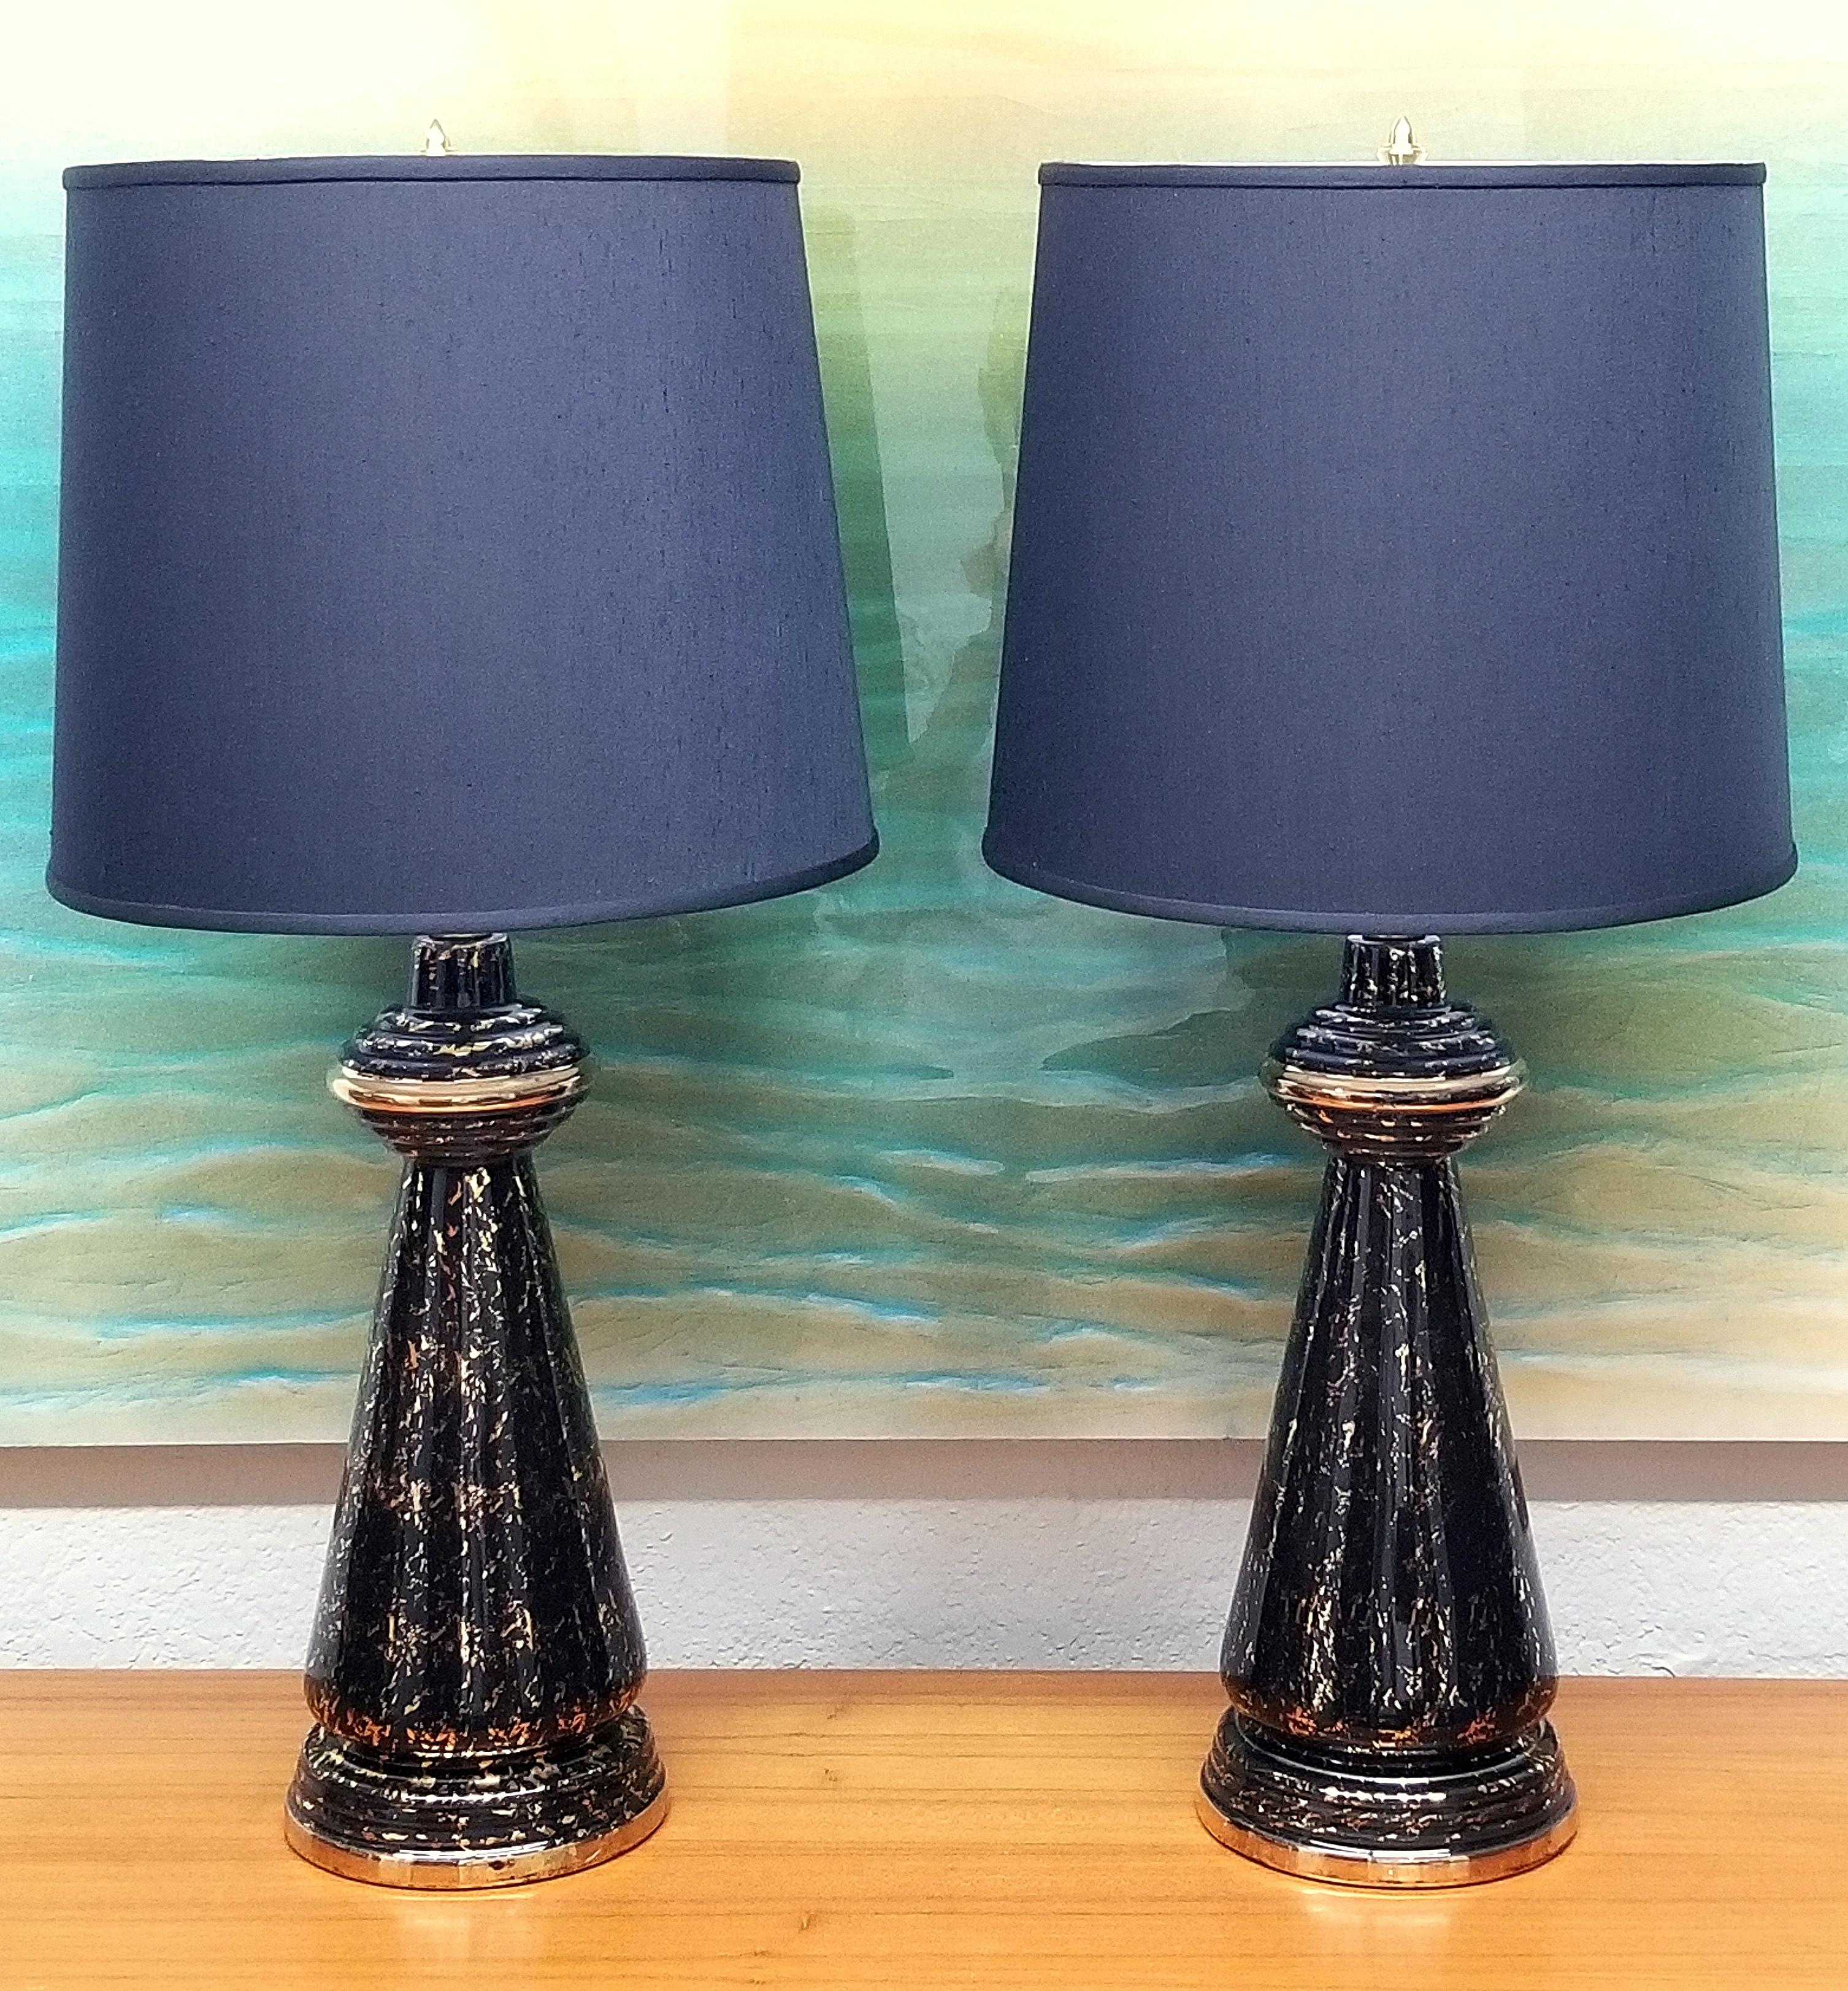 American Art Deco Black and Gold Table Lamps with New Custom Shades - a Pair For Sale